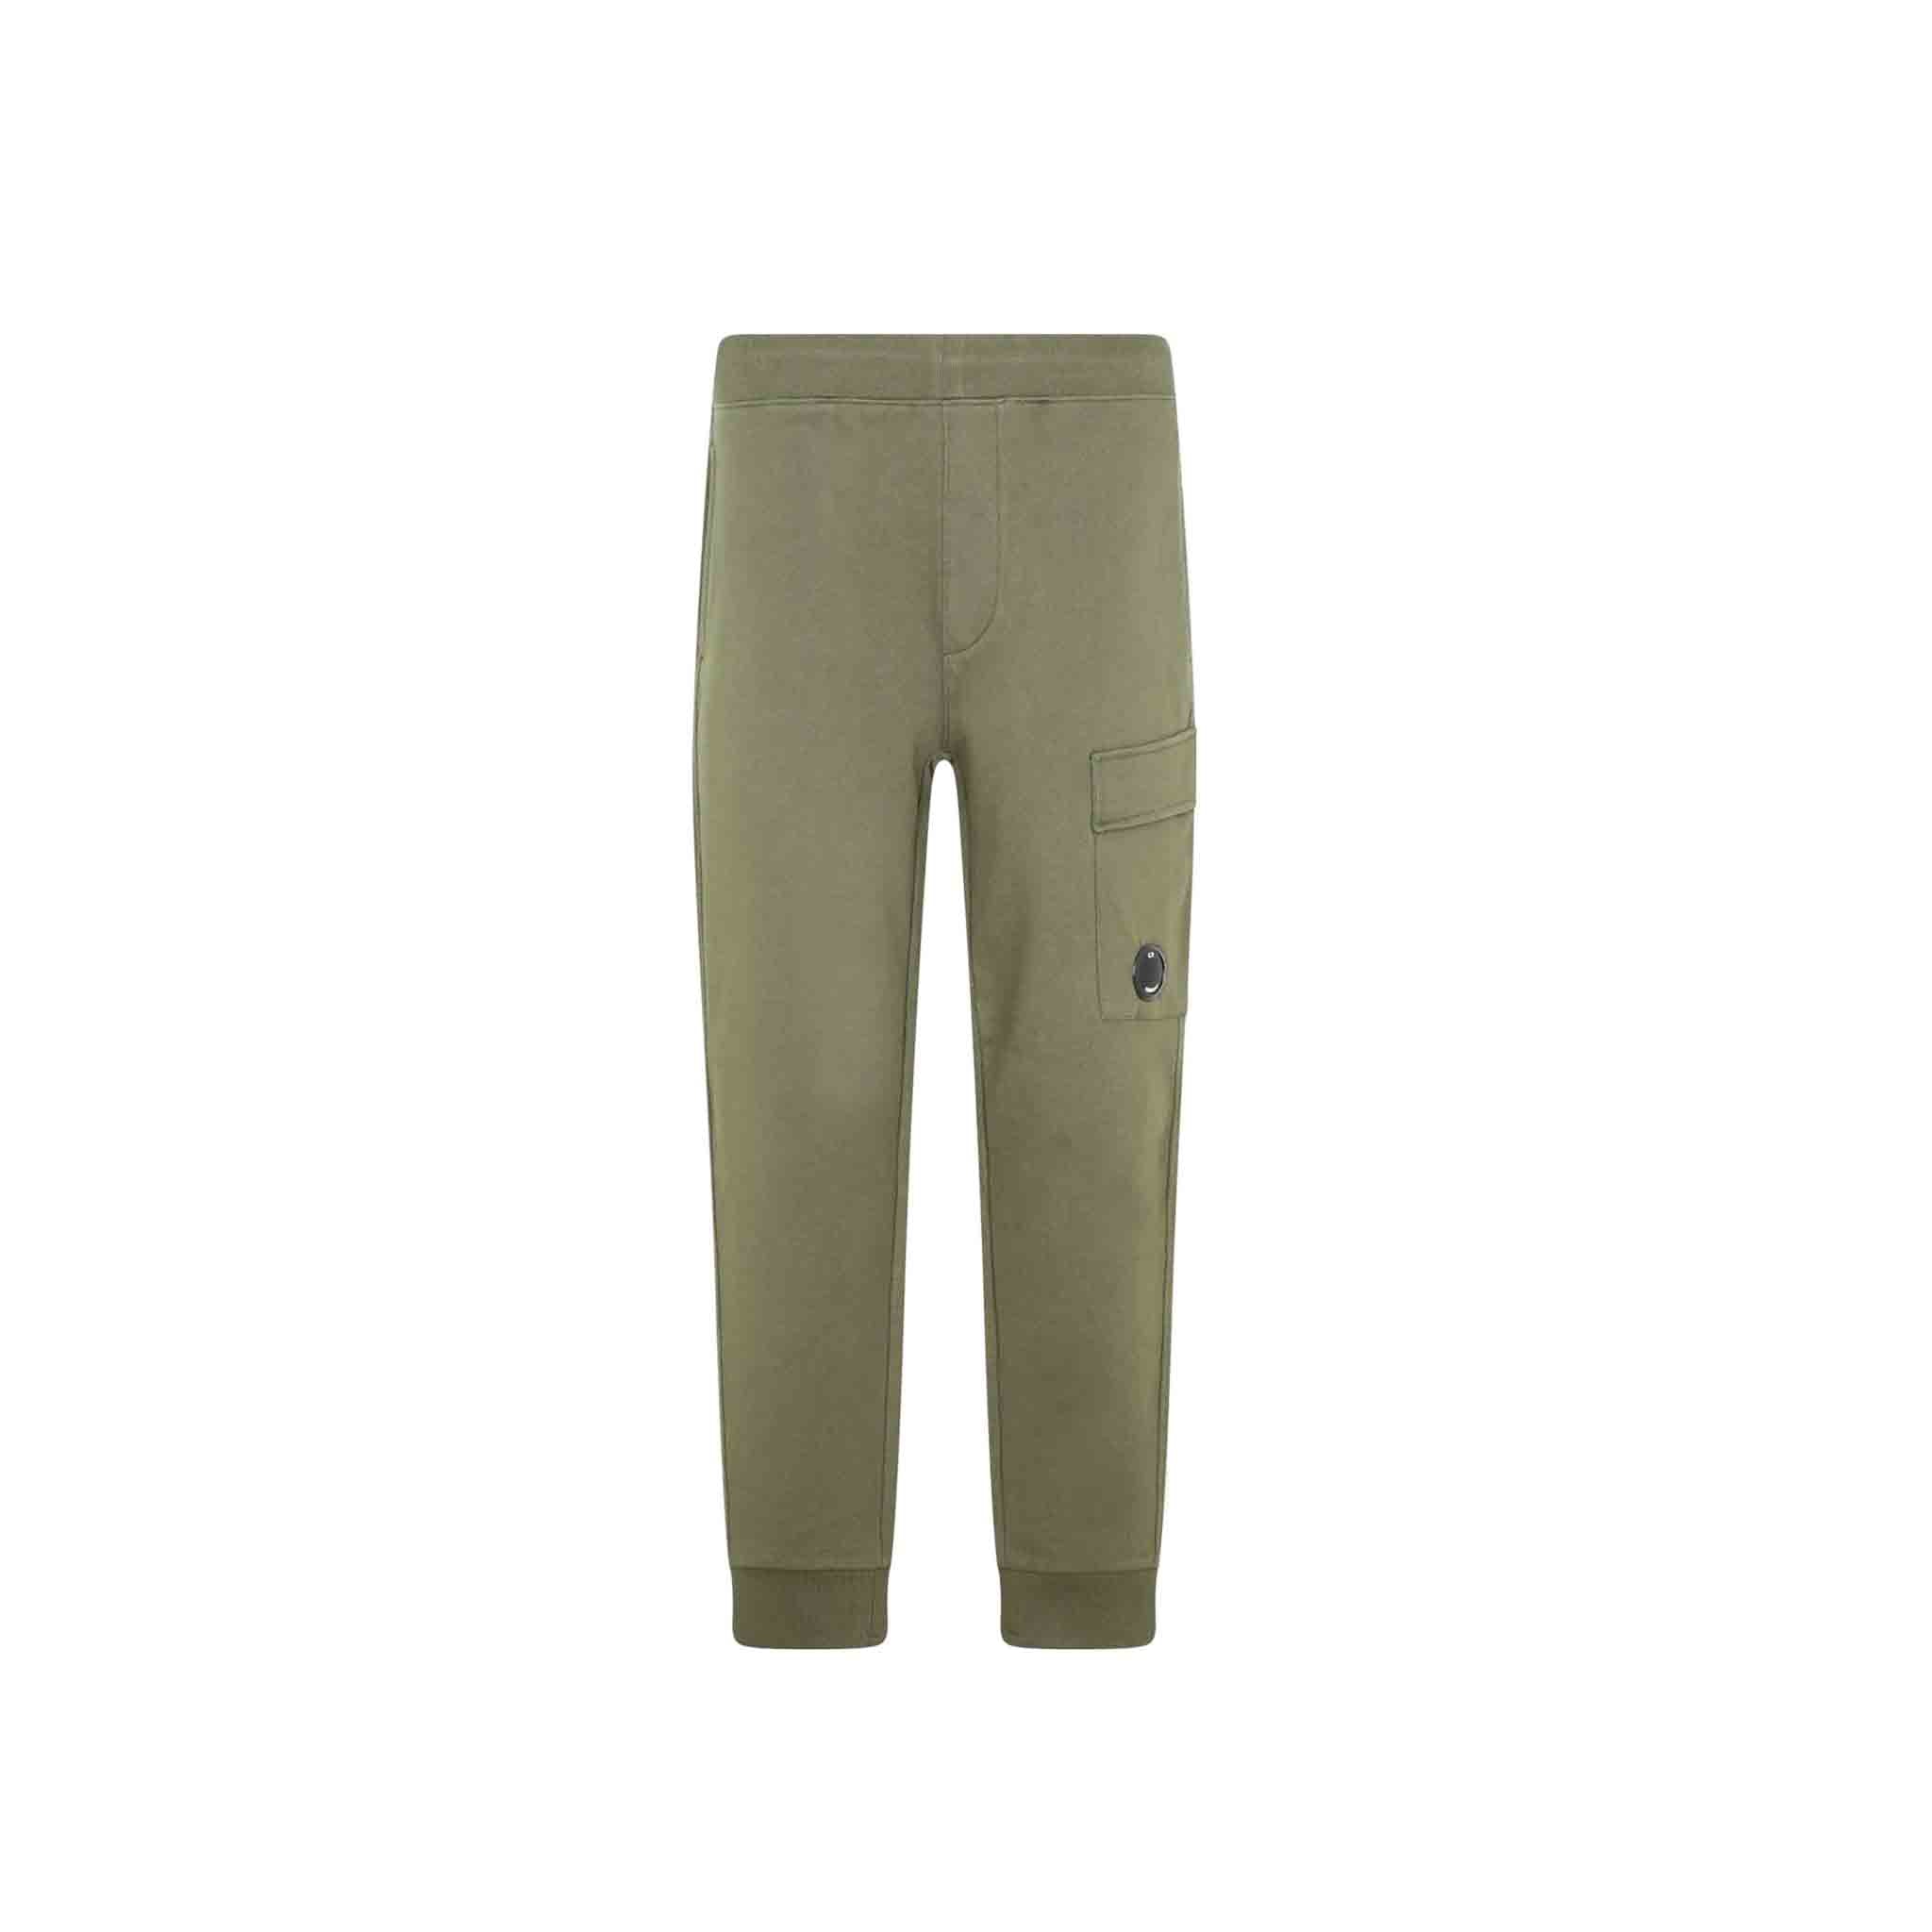 C.P Company sweatpants, cut with a tapered leg and an elasticated waist, these men's sweatpants offer a comfortable, flexible fit, finished with two zipped leg pockets and the C.P. Company Lens detail at the left side. Crafted in diagonal raised fleece, a midweight loopback cotton option that combines absolute comfort with a substantial and hard-wearing feel.